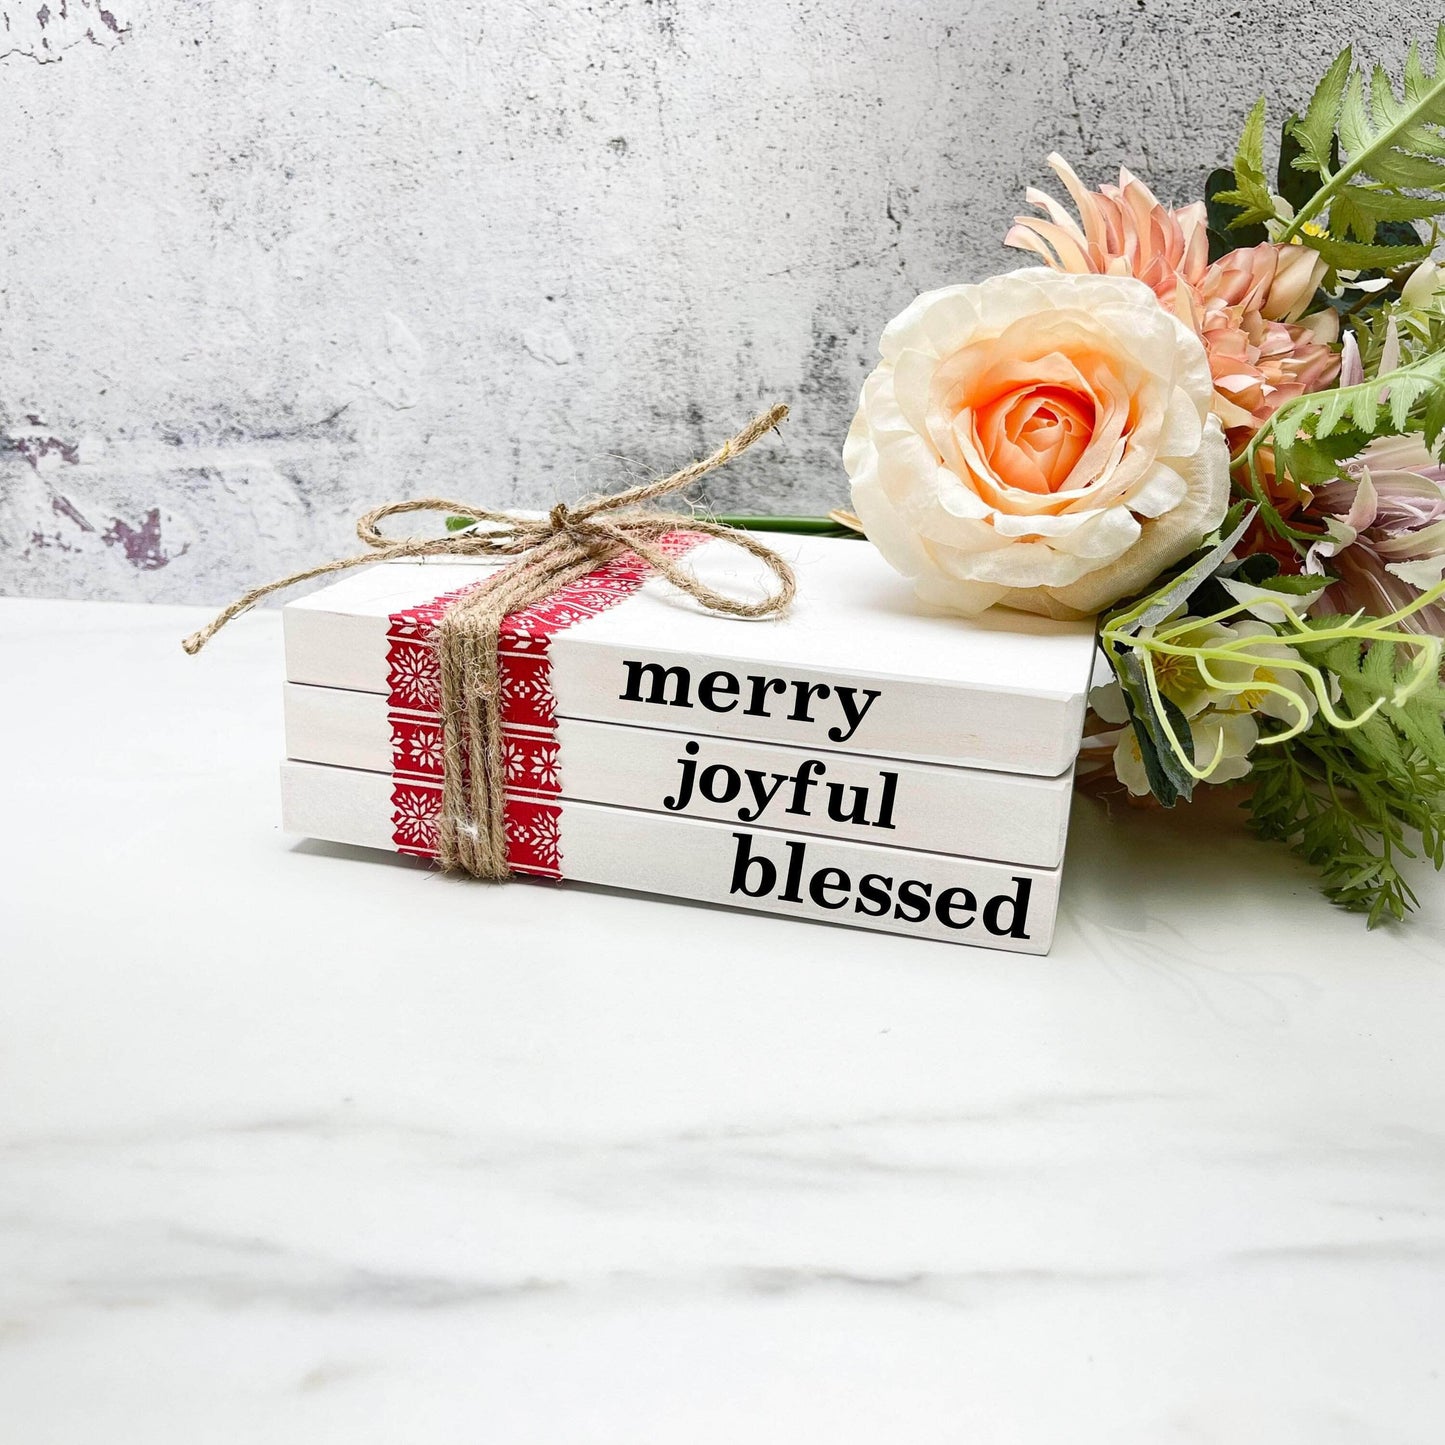 Merry joyful blessed faux book stack